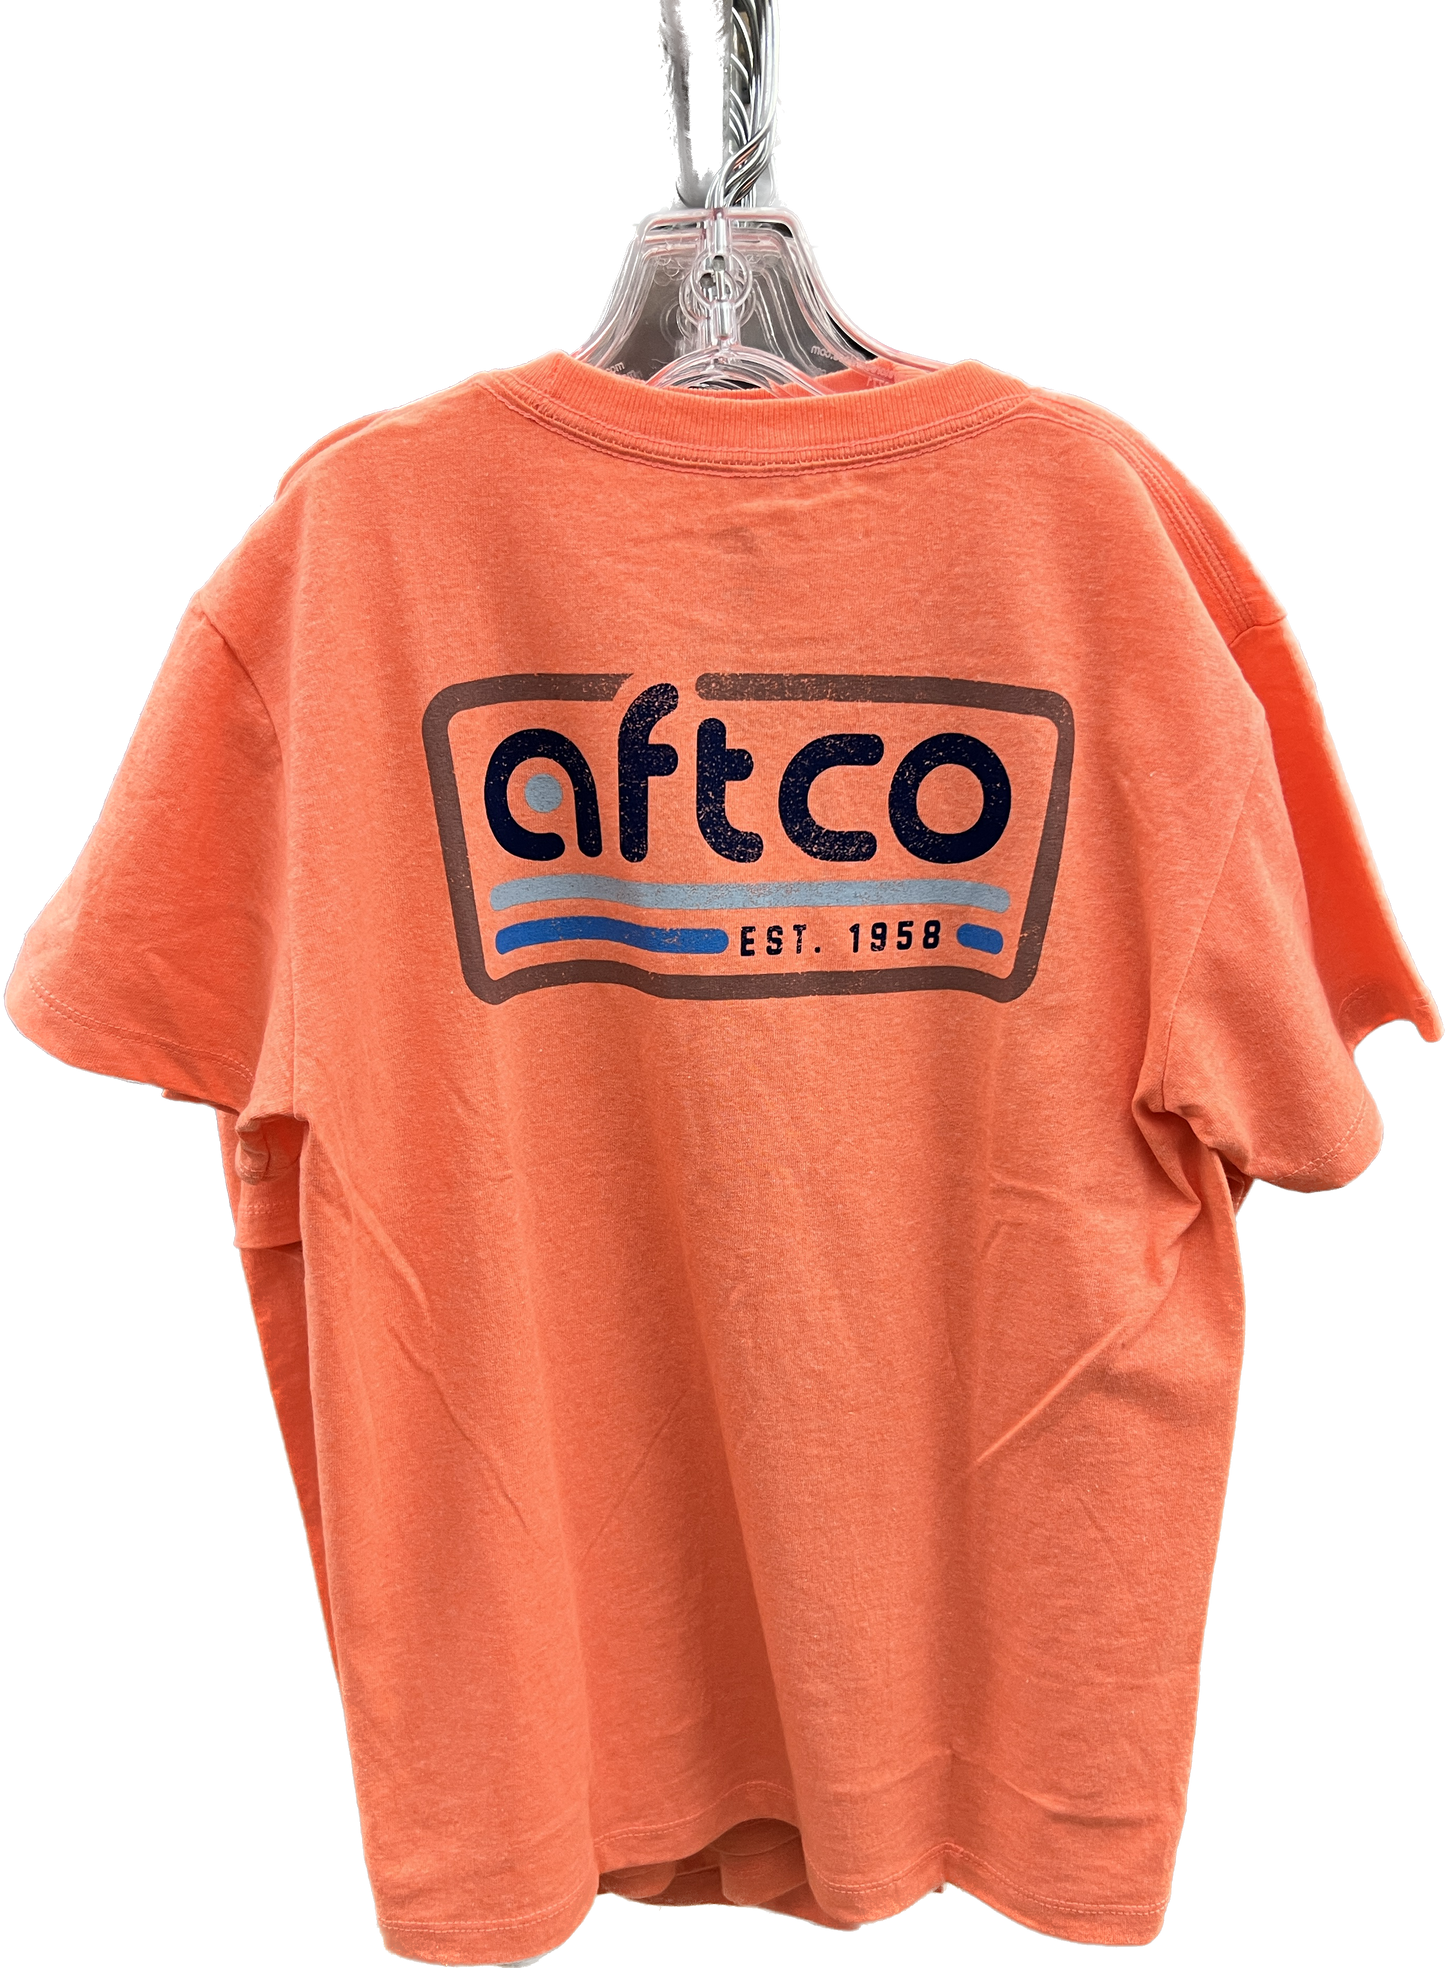 AFTCO Youth Fade Neon Peach Heather